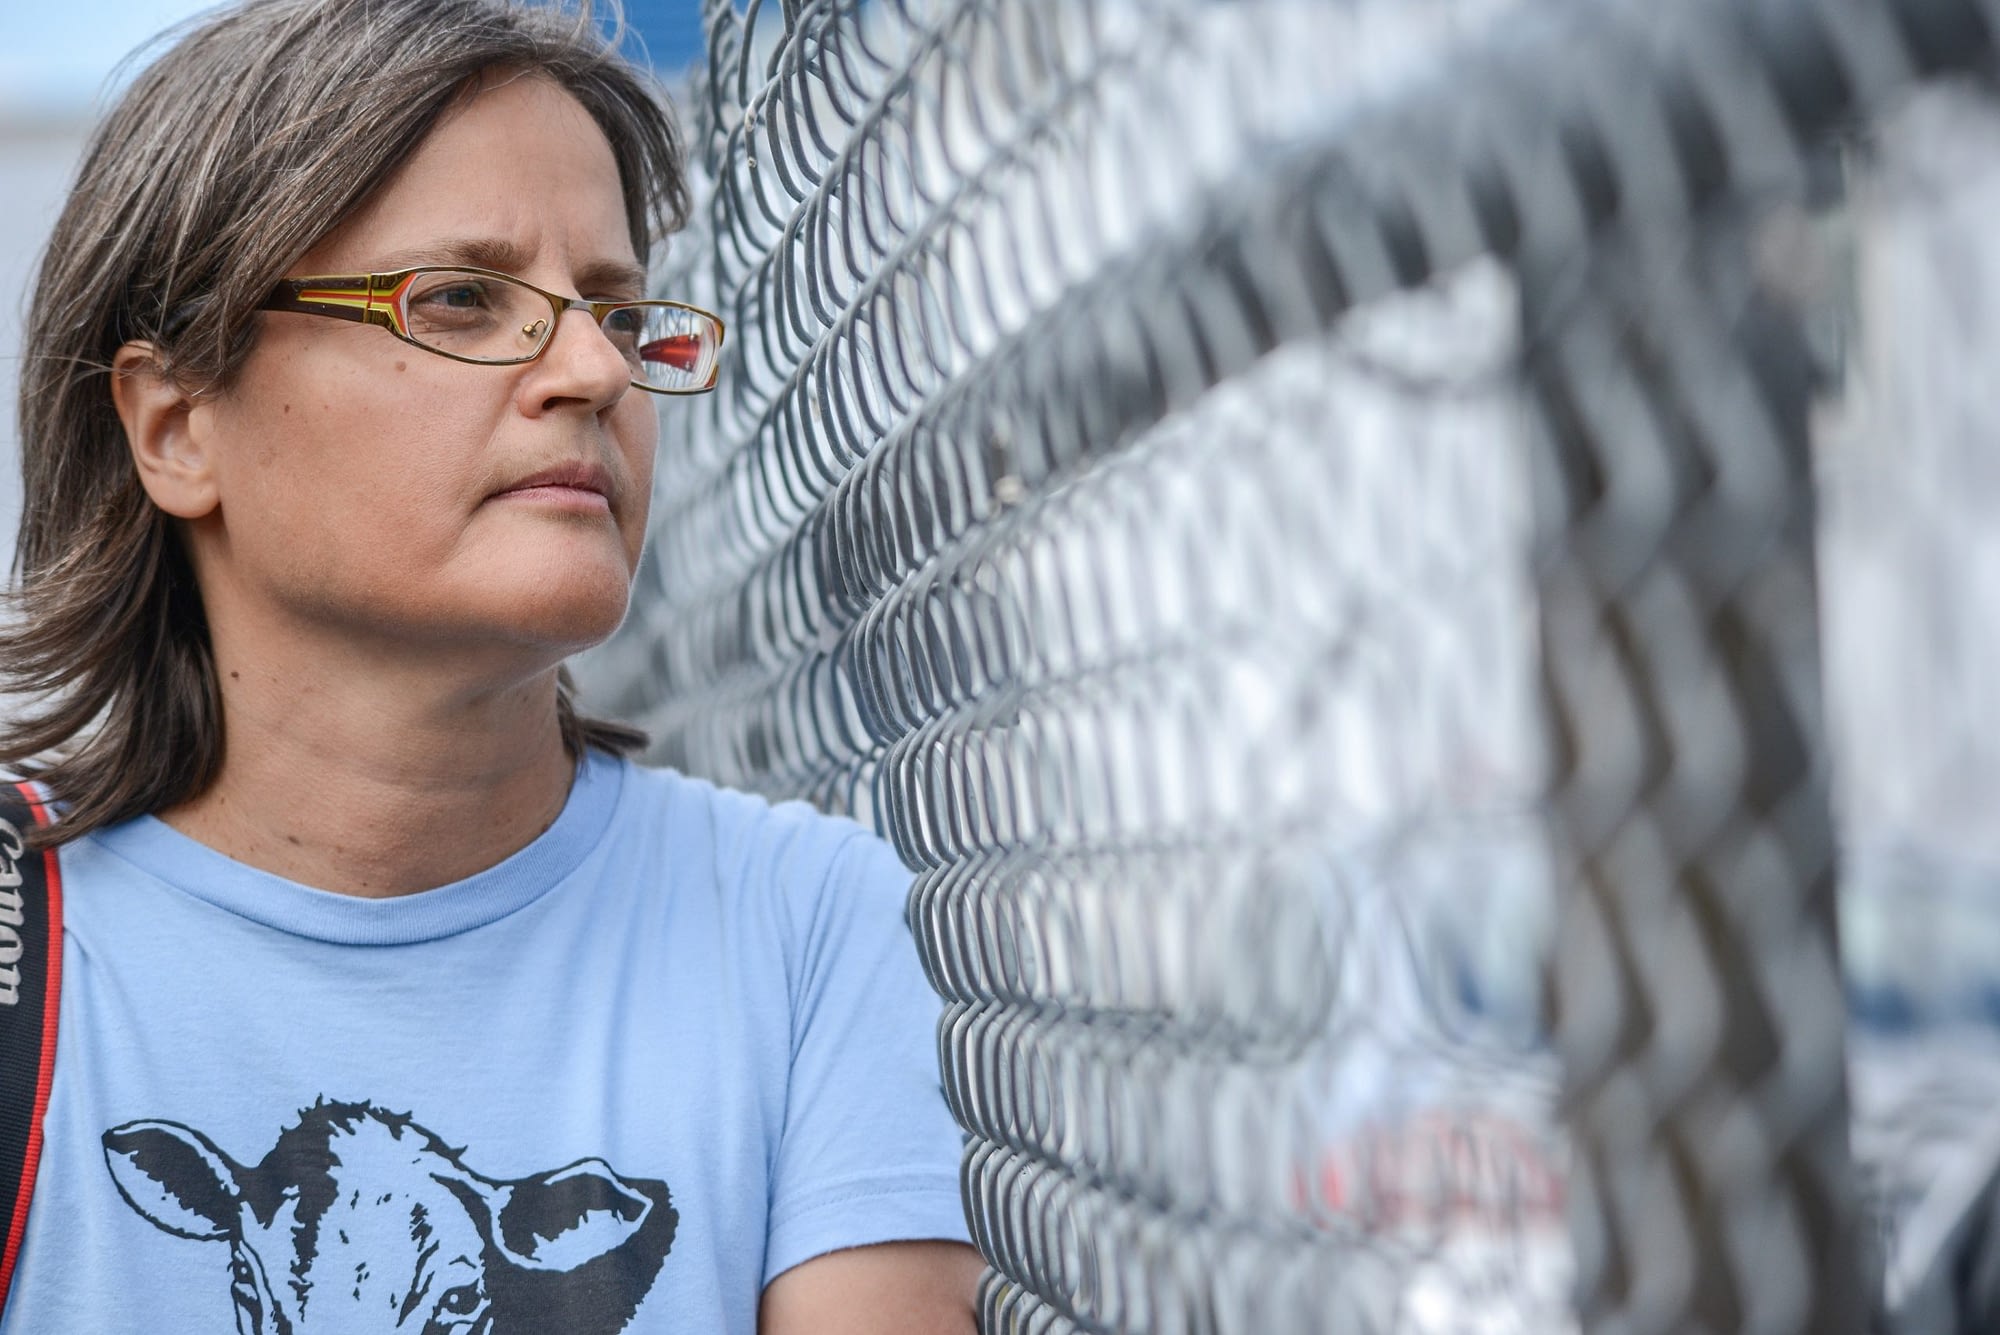 Anita Krajnc looks through the fence to animals being unloaded at the slaughterhouse. Canada, 2015.